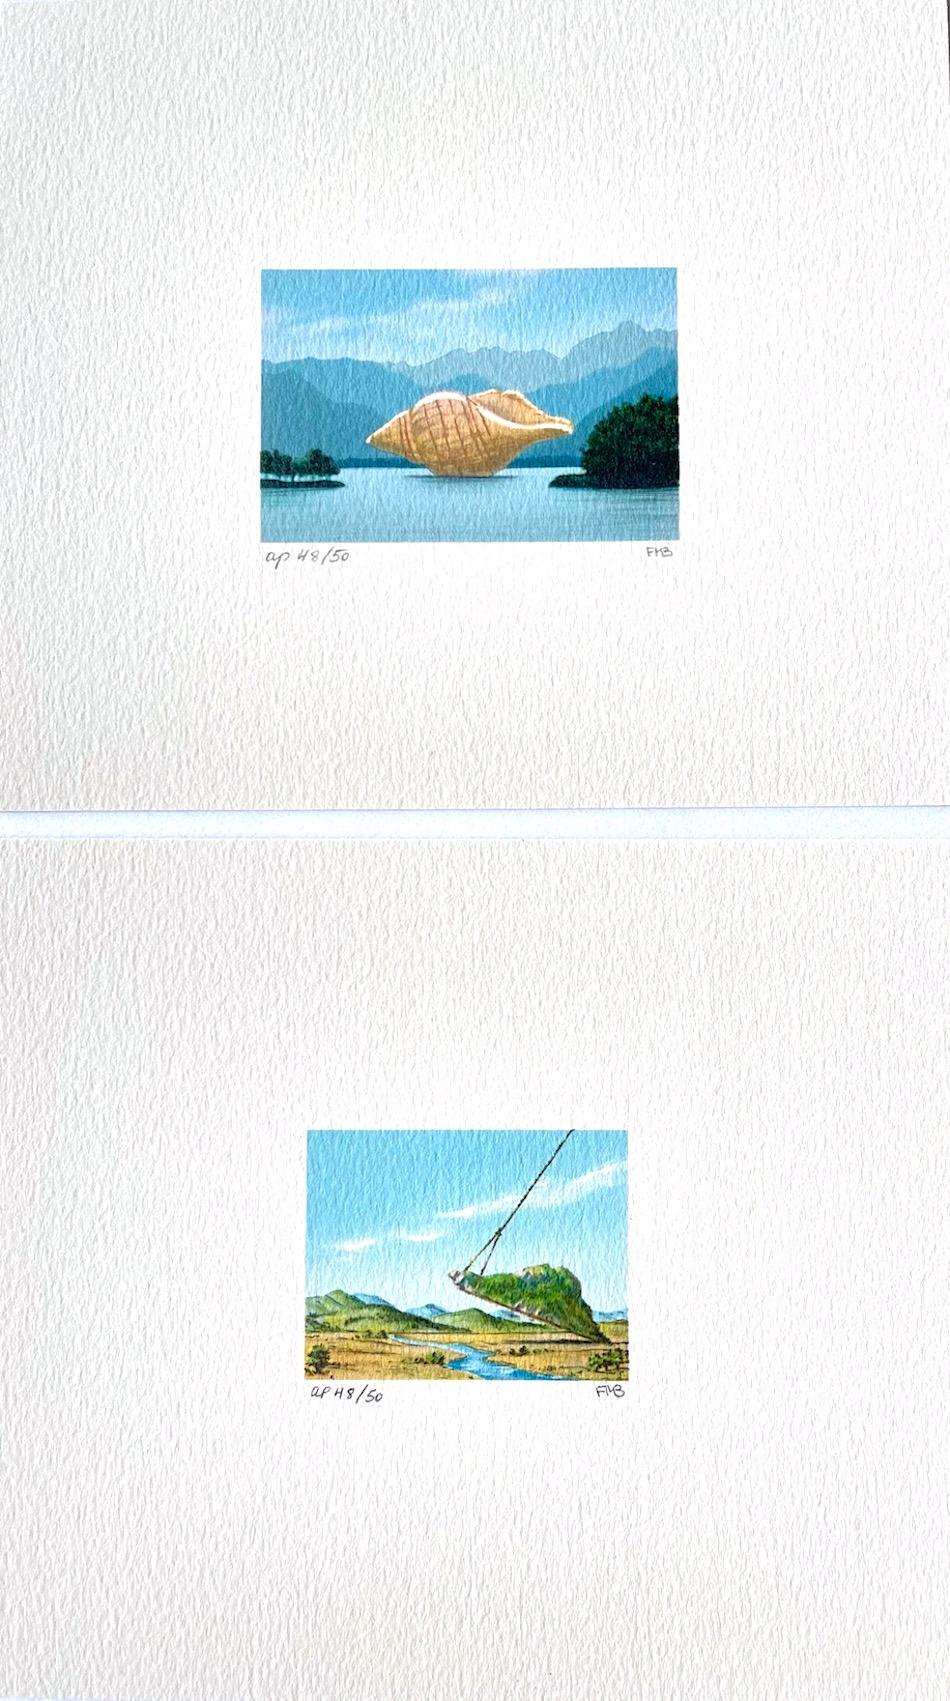 Fanny Brennan Print - THE VISITOR and MOUNTAIN LIFT, 2 Signed Lithographs, Miniature Surreal Landscape